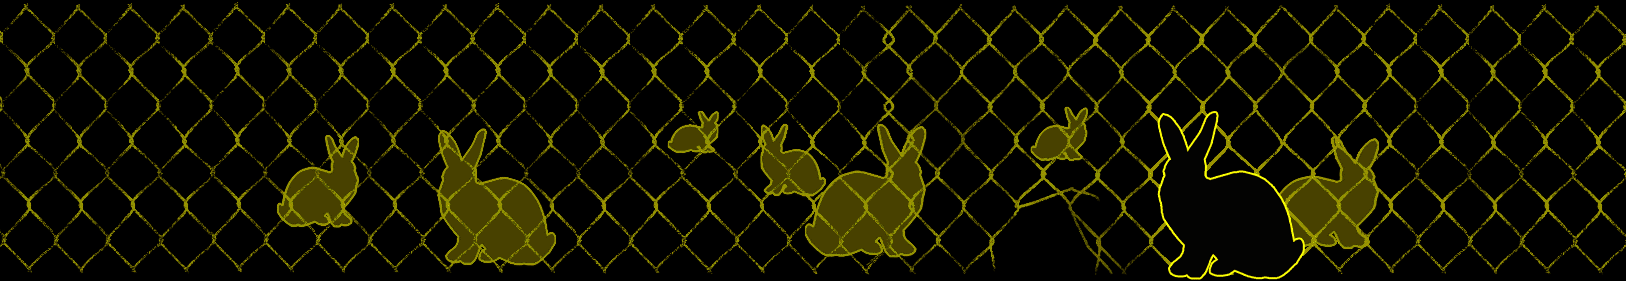 rabbitprooffence_by_13.gif